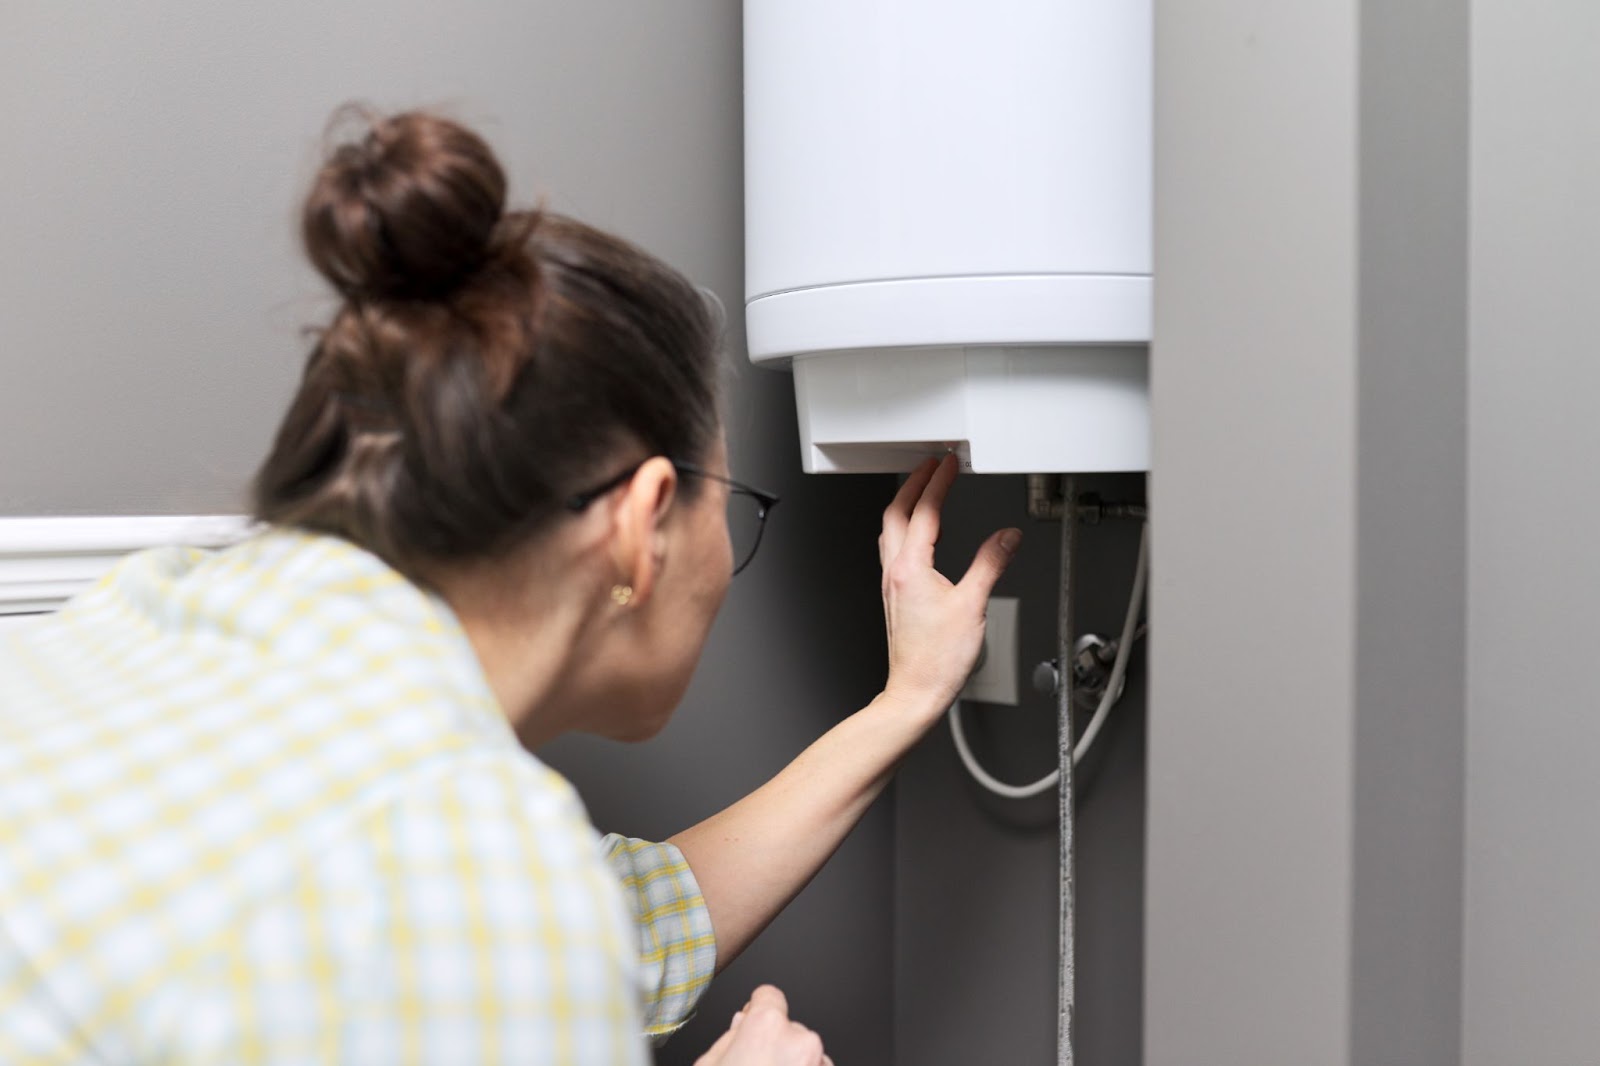 how long does a water heater last